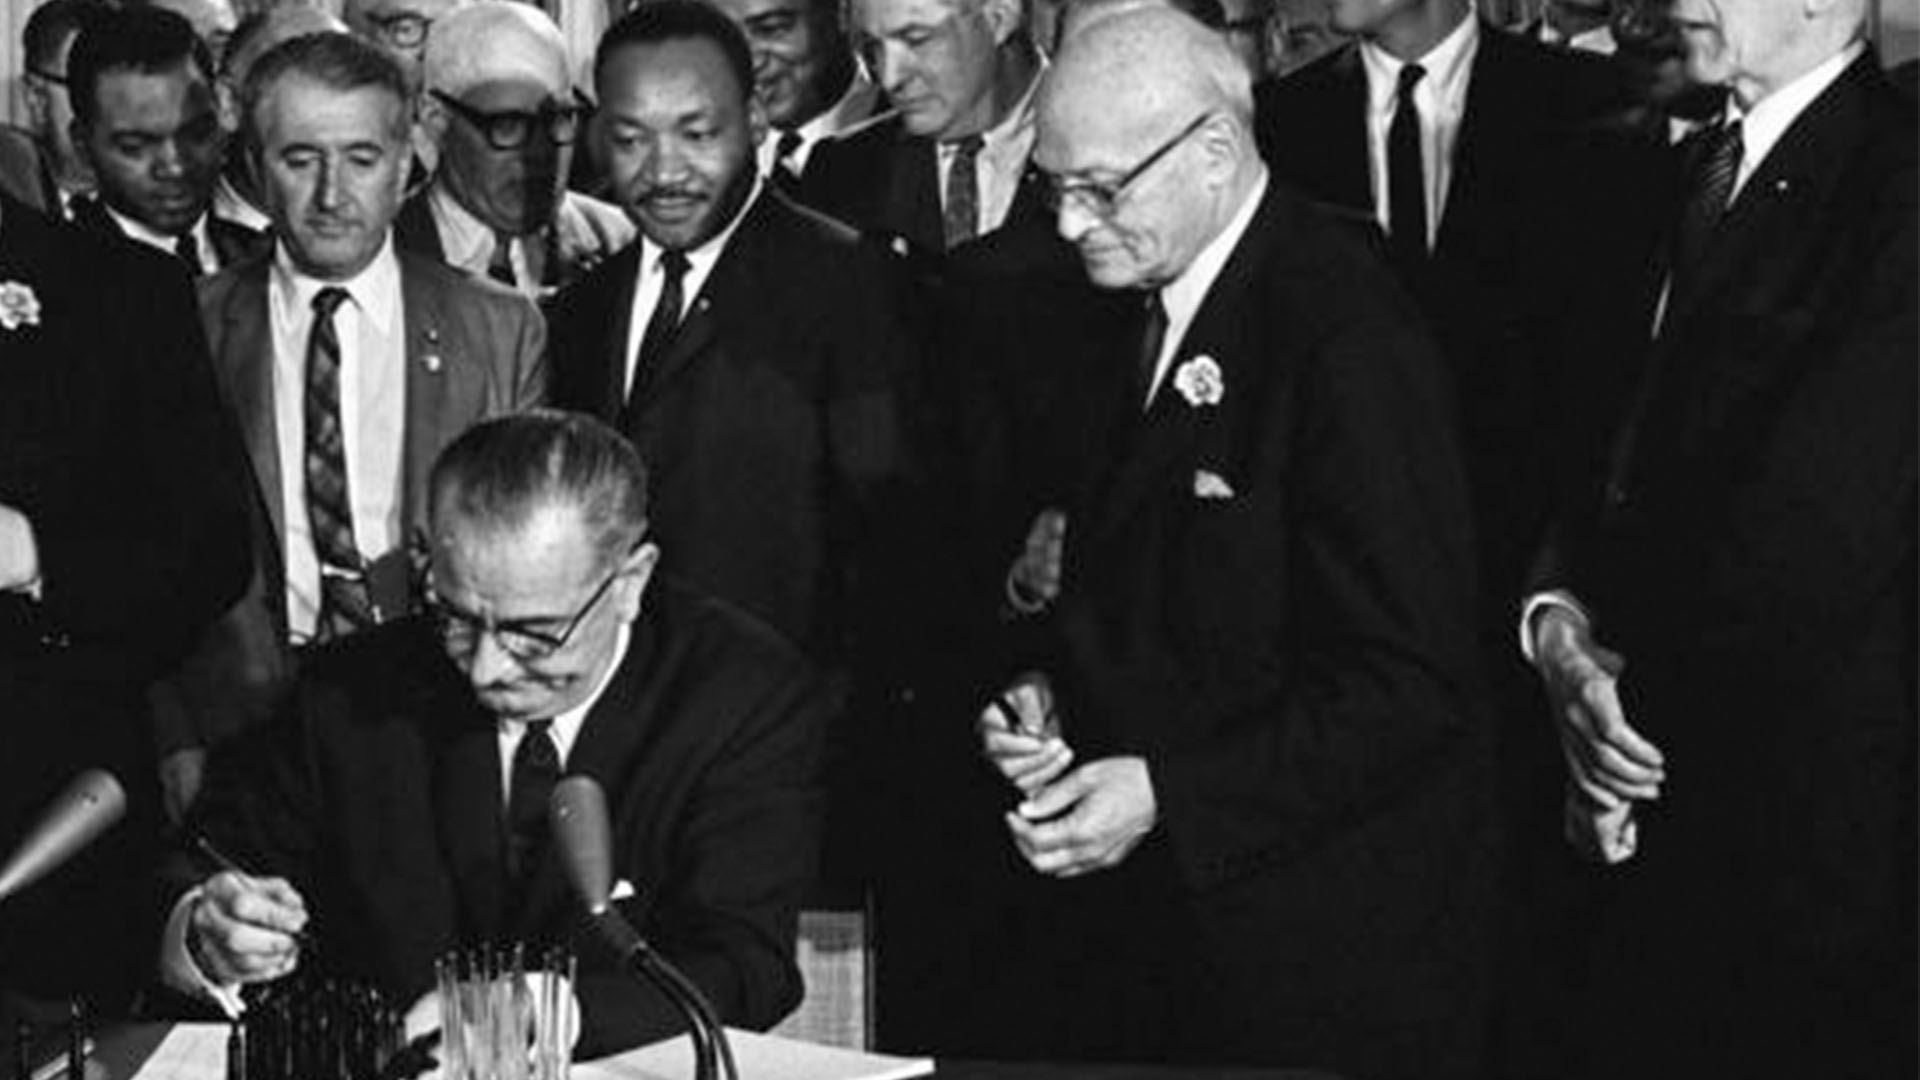 8 Steps That Paved the Way to the Civil Rights Act of 1964